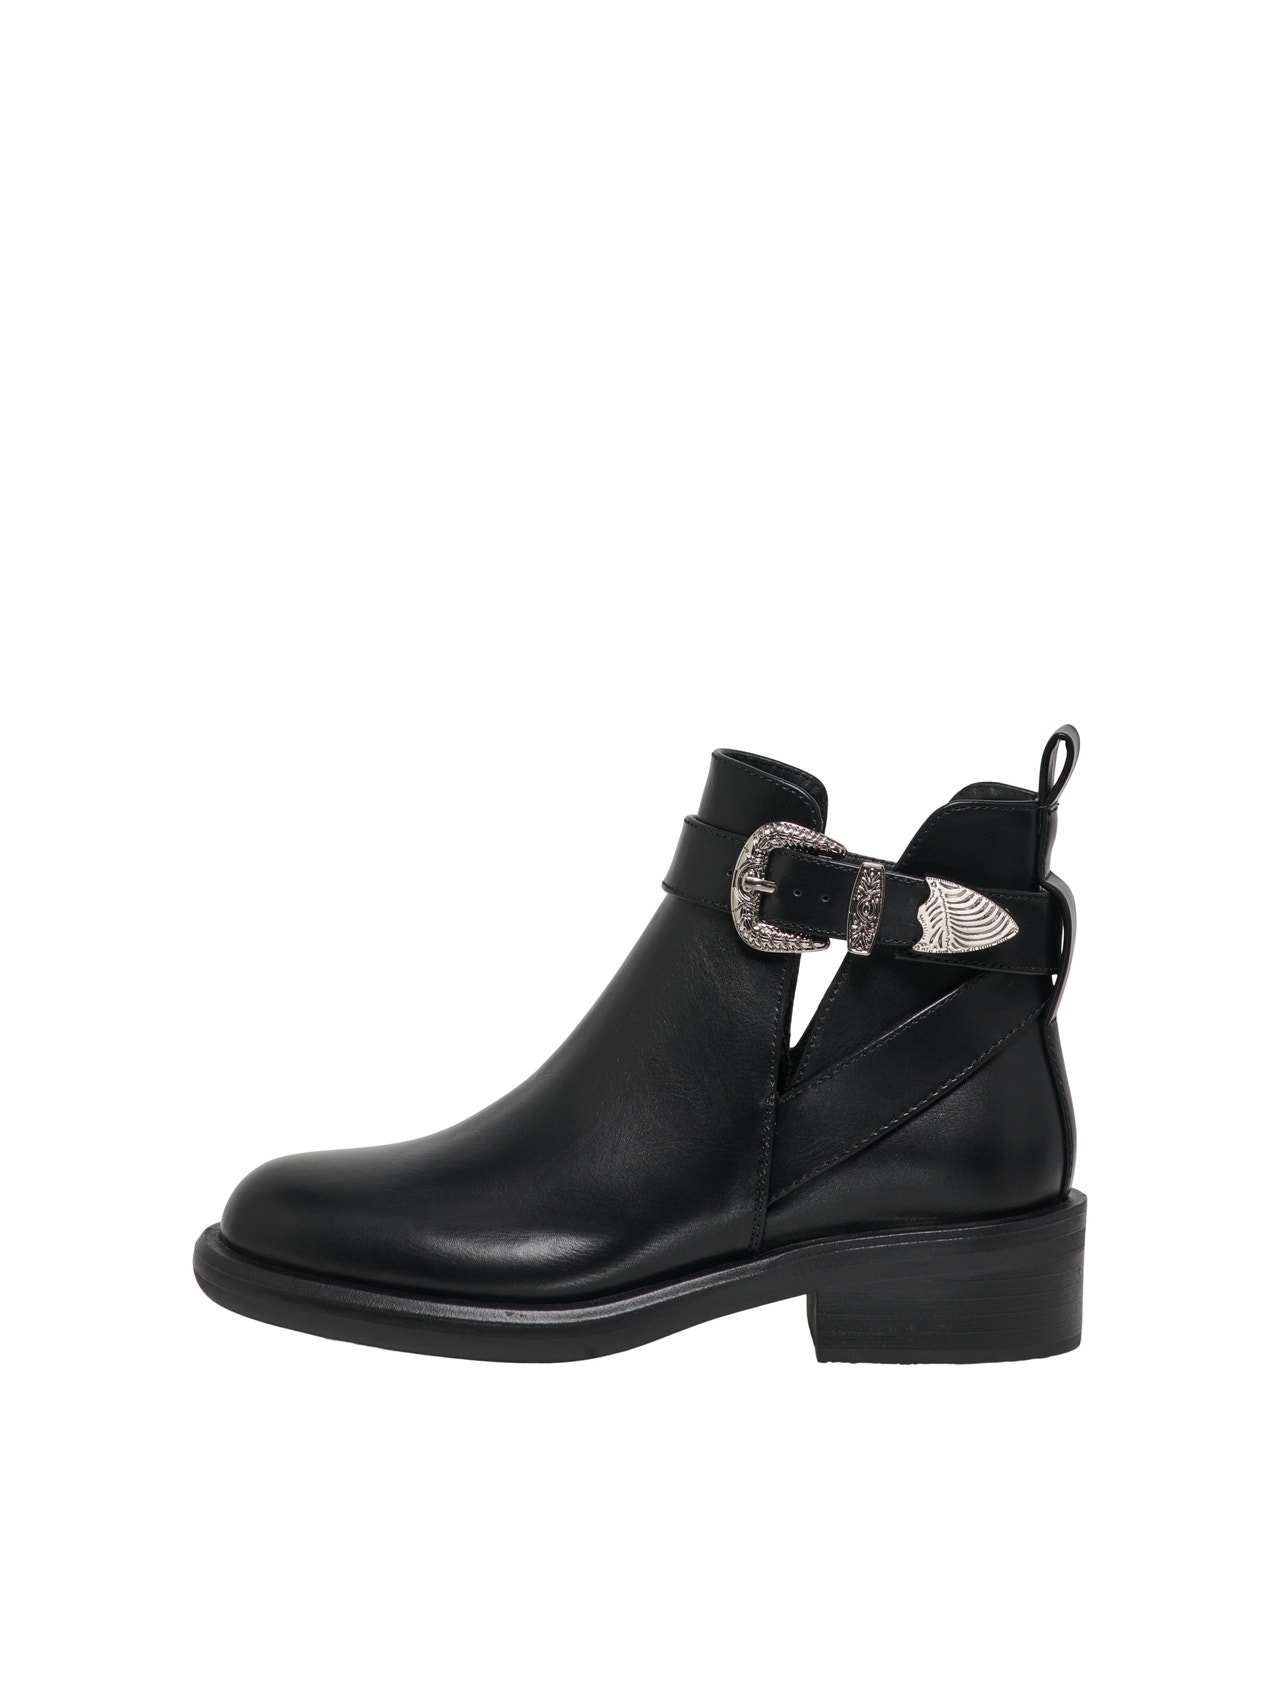 ONLY Almond toe Strap detail Boots -Black - 15304987